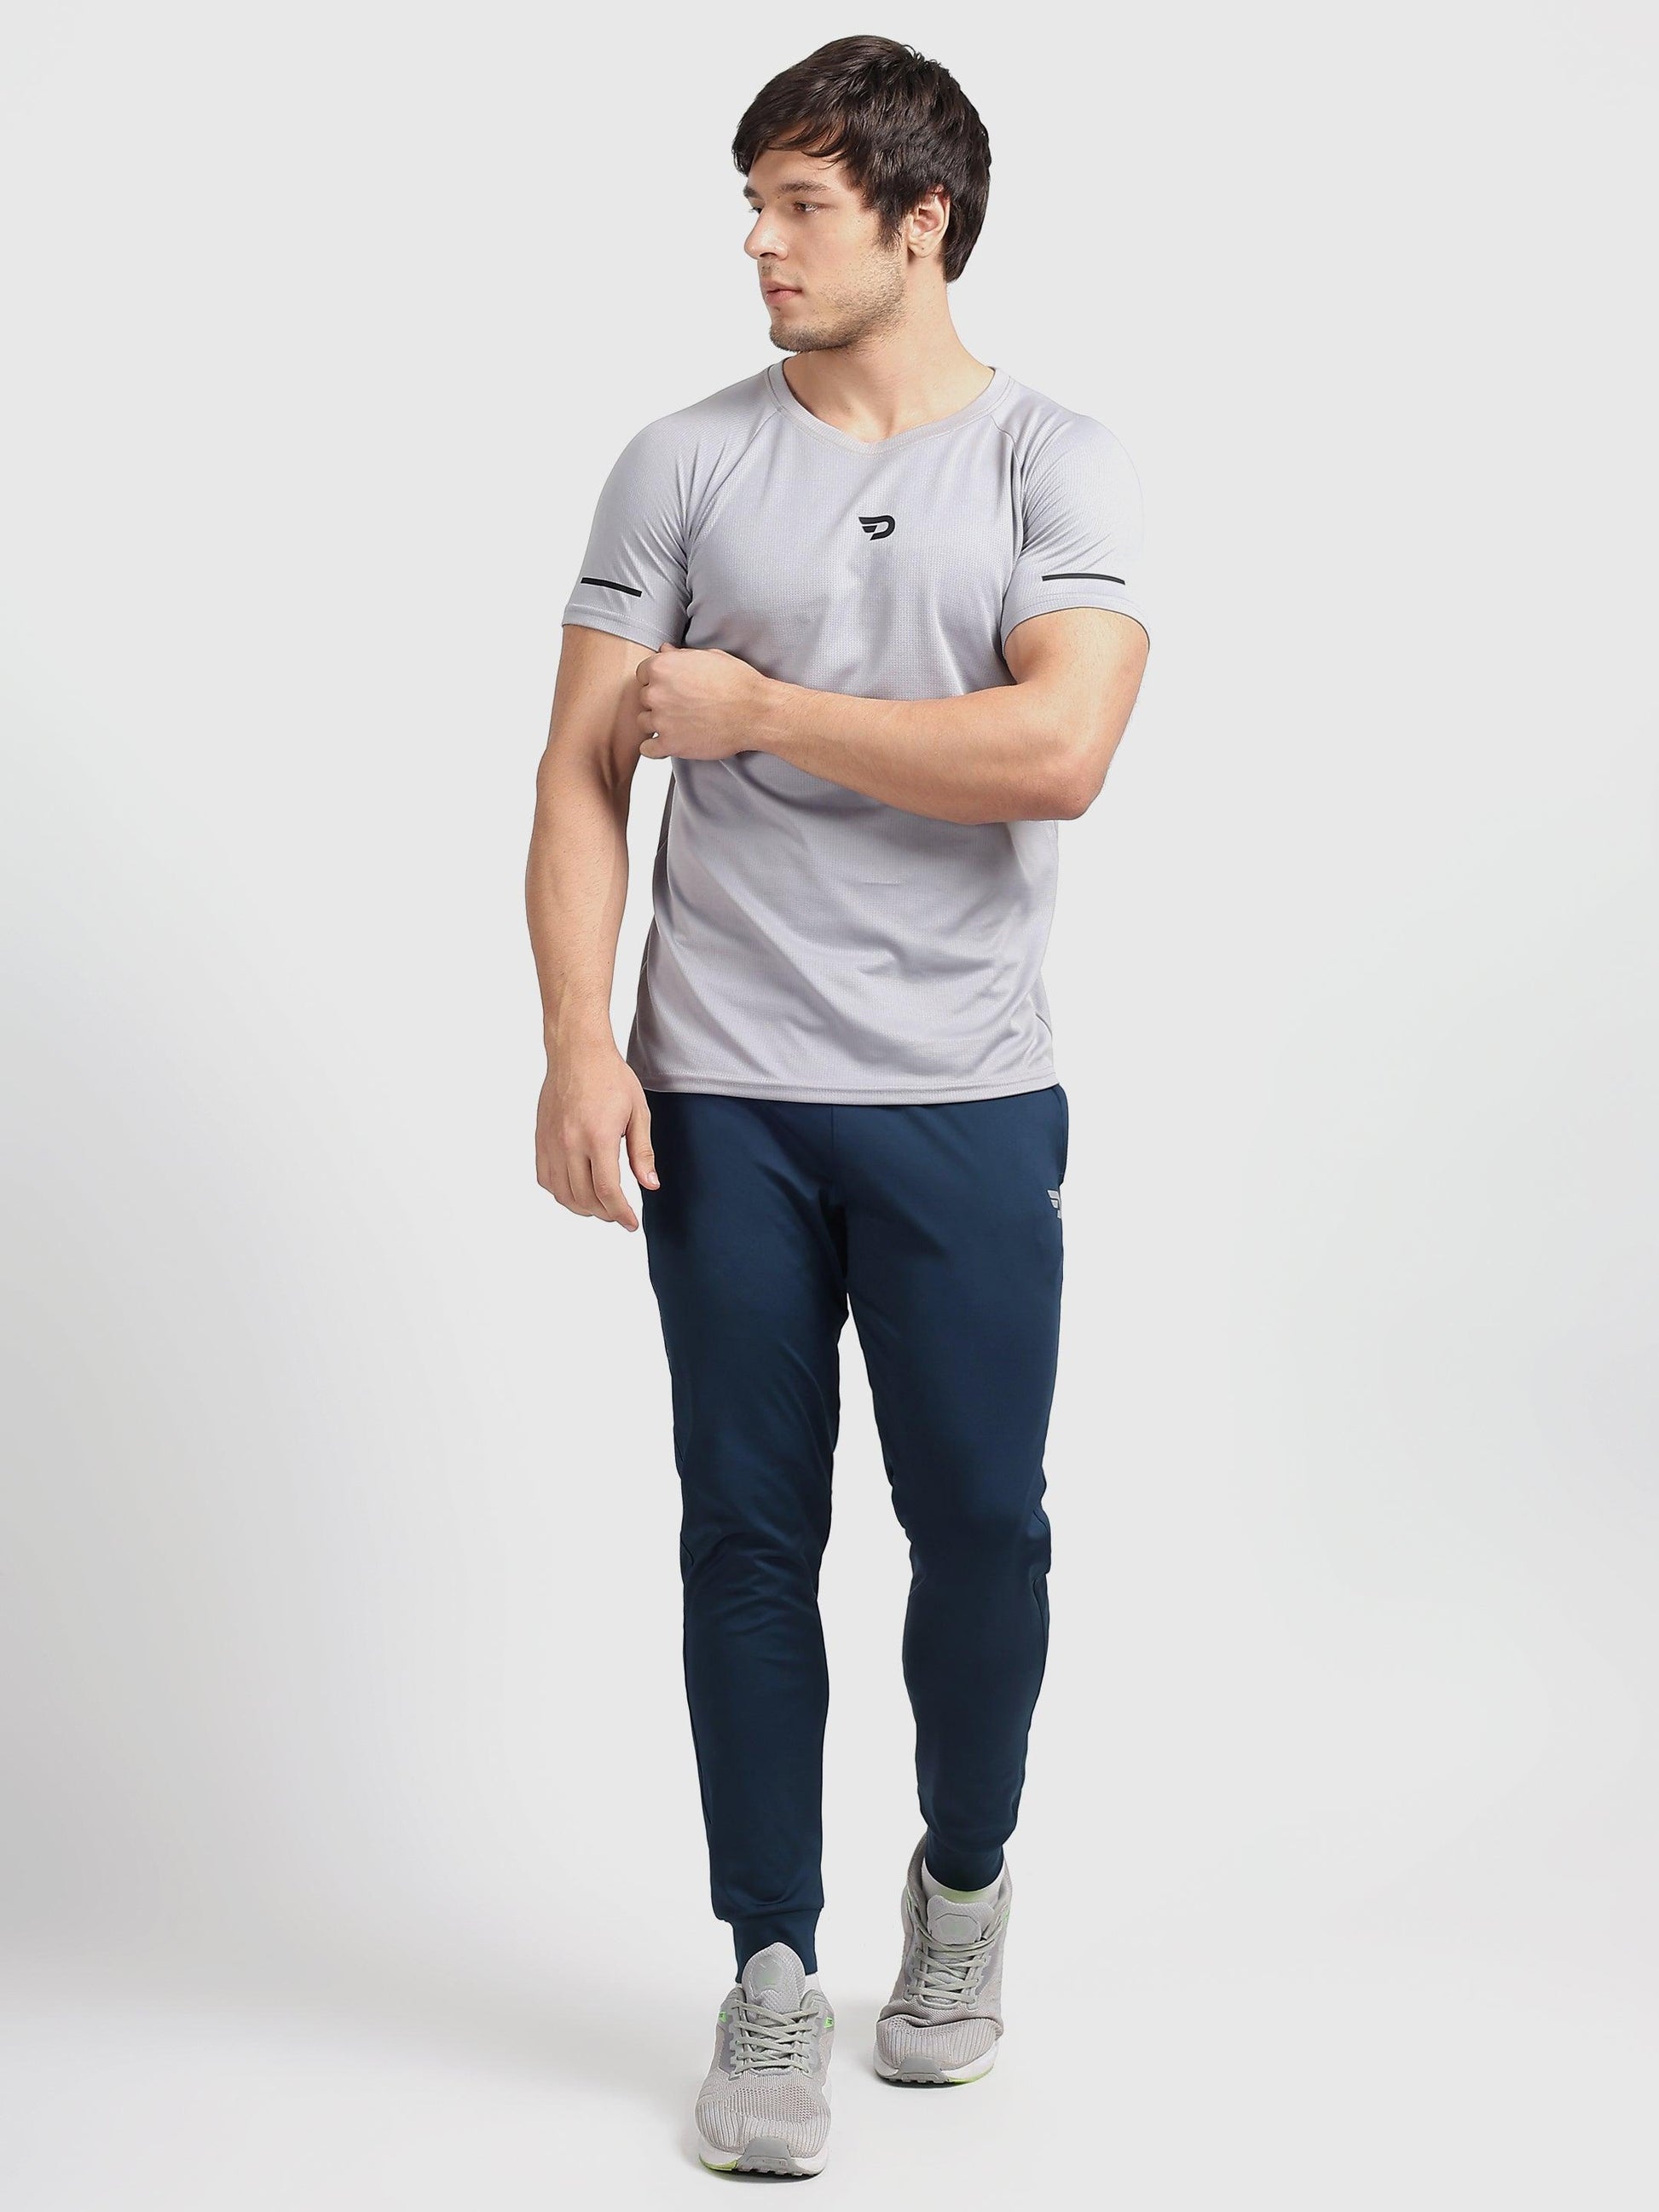 Denmonk: Elevate your look with these Power joggers sharp regal blue joggers for mens.